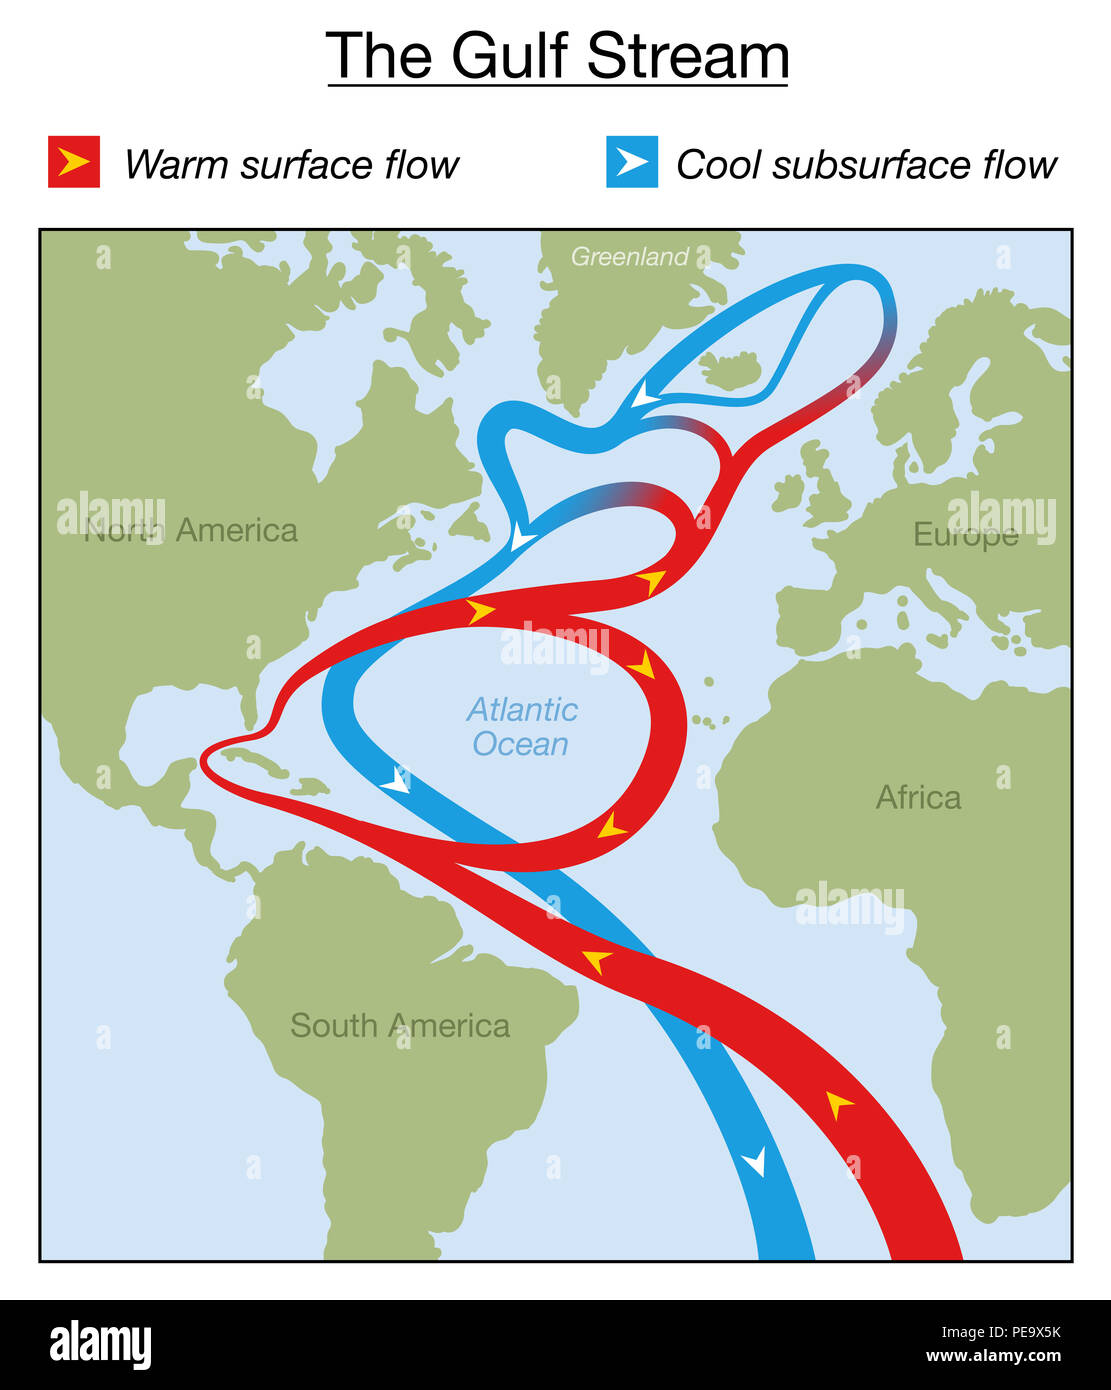 Gulf Stream chart. Warm surface and cold subsurface flow in the Atlantic Ocean between North and South America, Africa, Europe and Greenland. Stock Photo